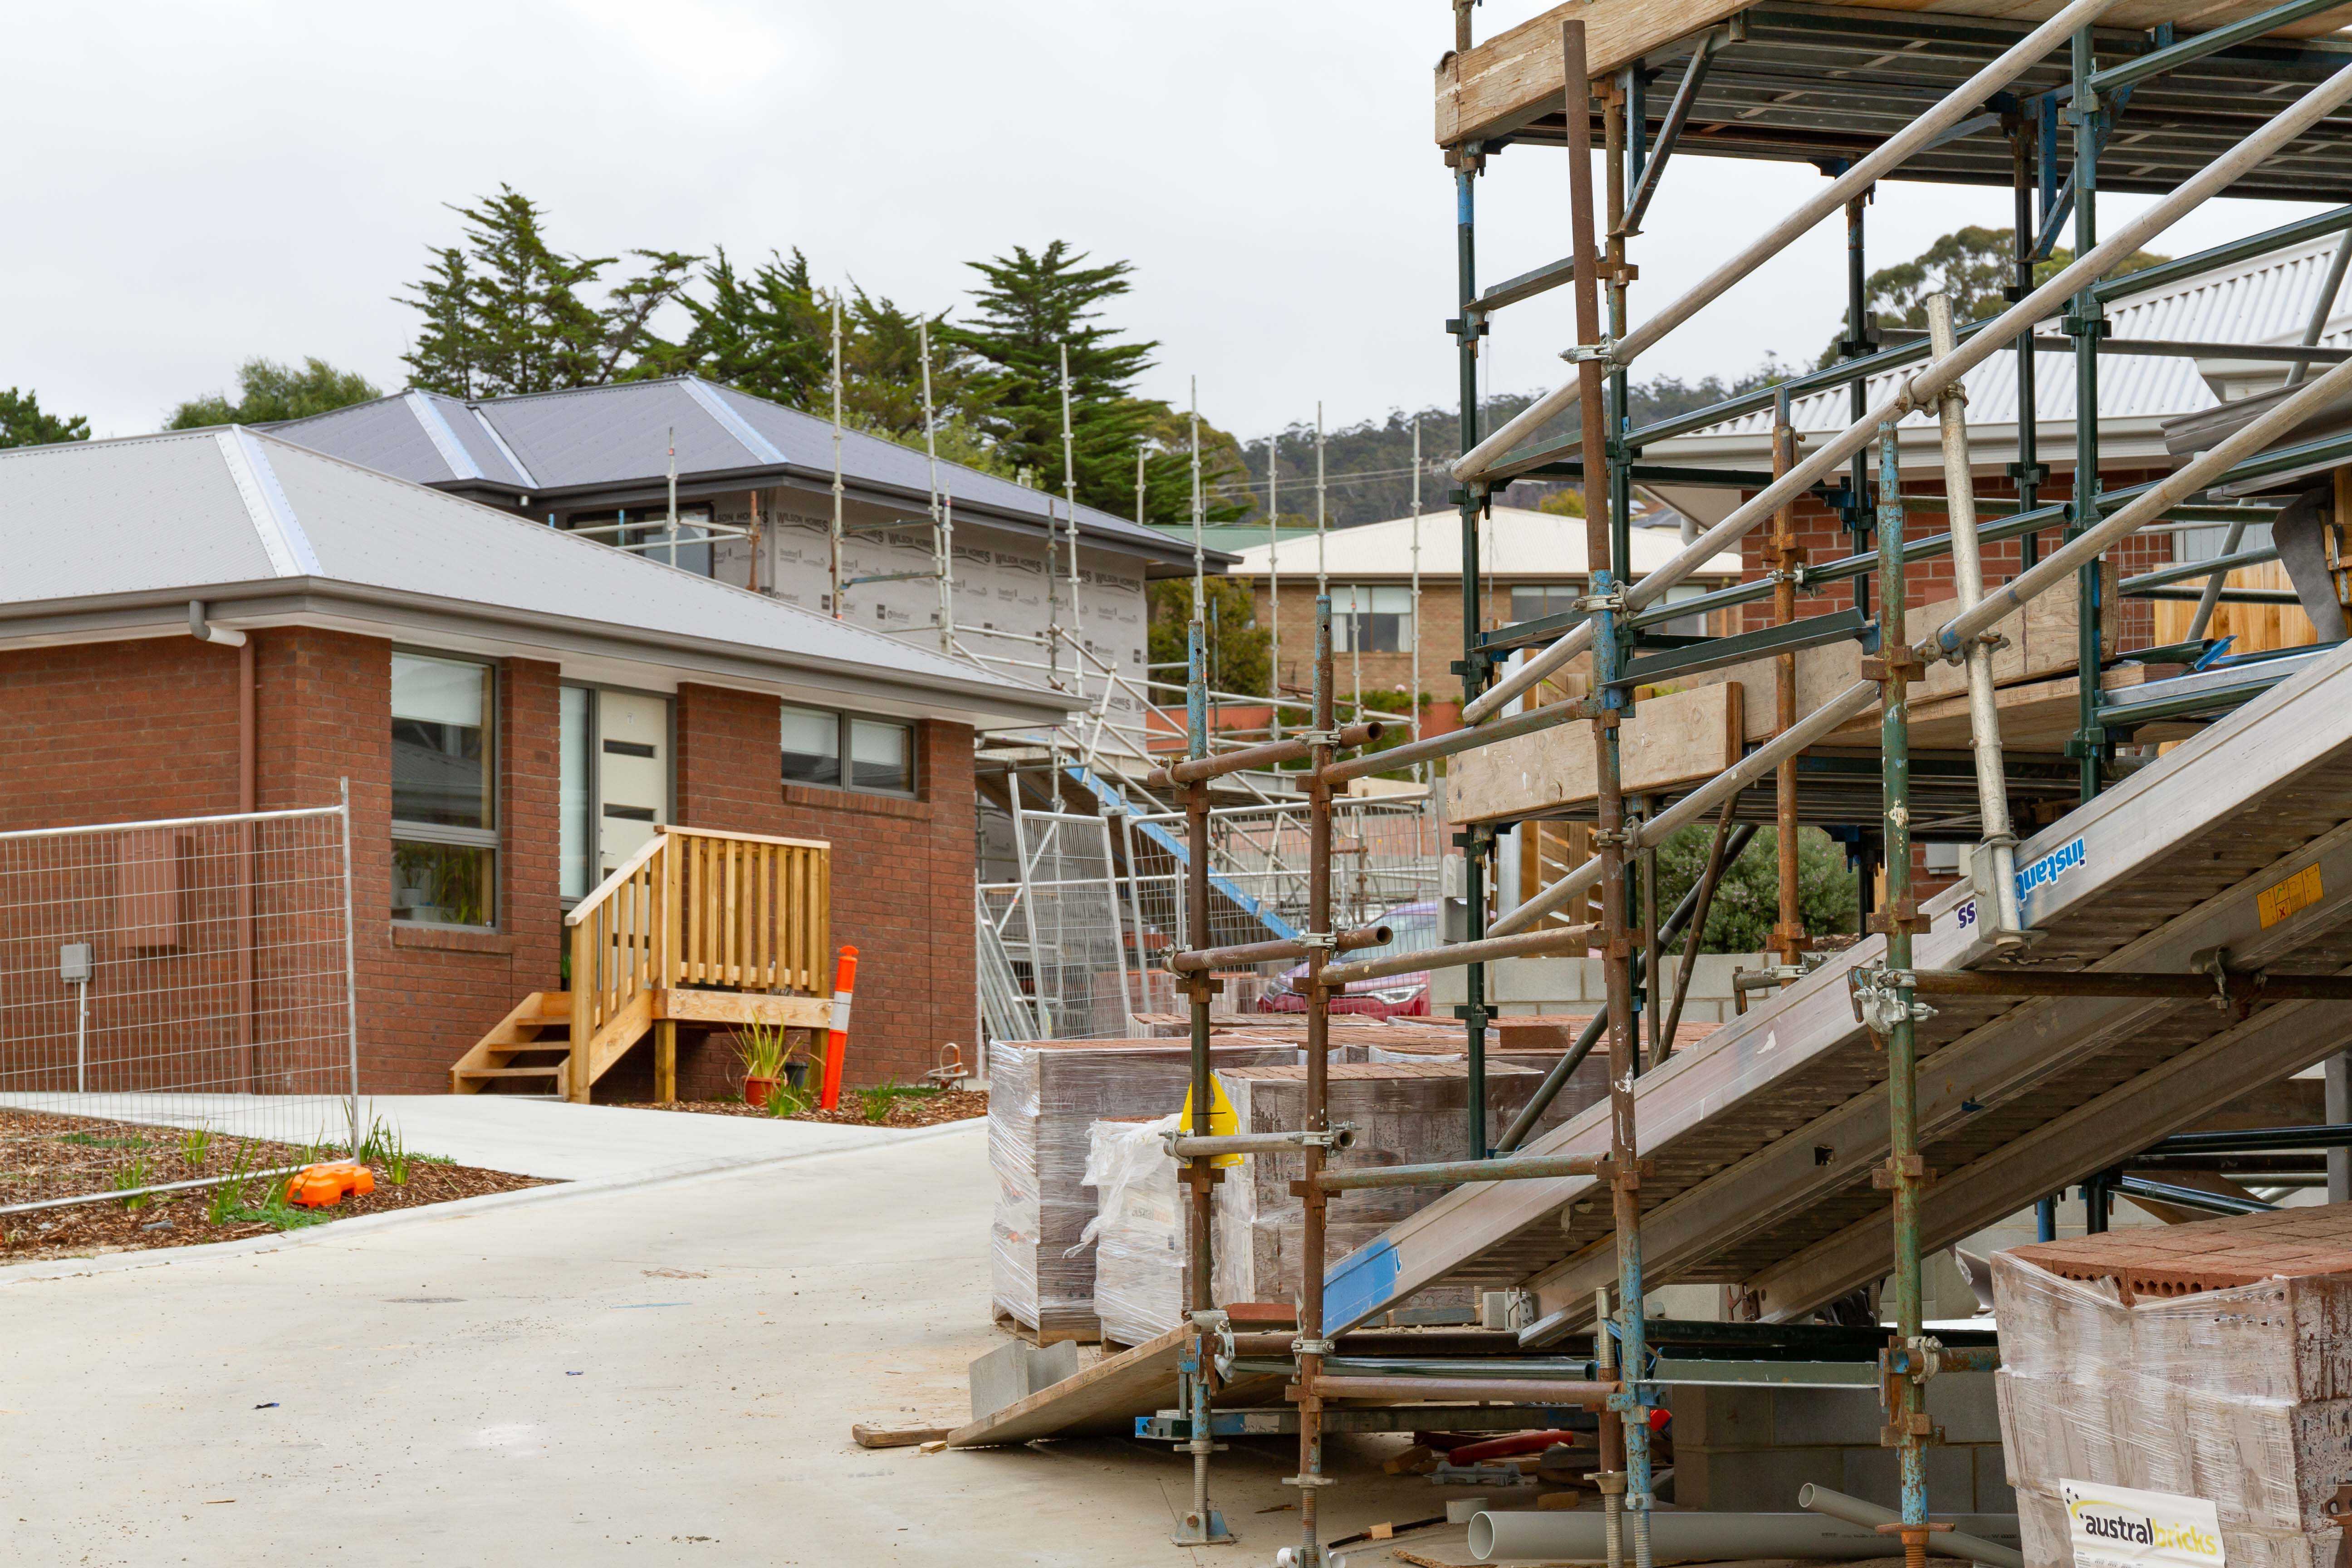 CEH is ready to lead a construction-led economic recovery in Tasmania, by building more homes for those at risk of homelessness.